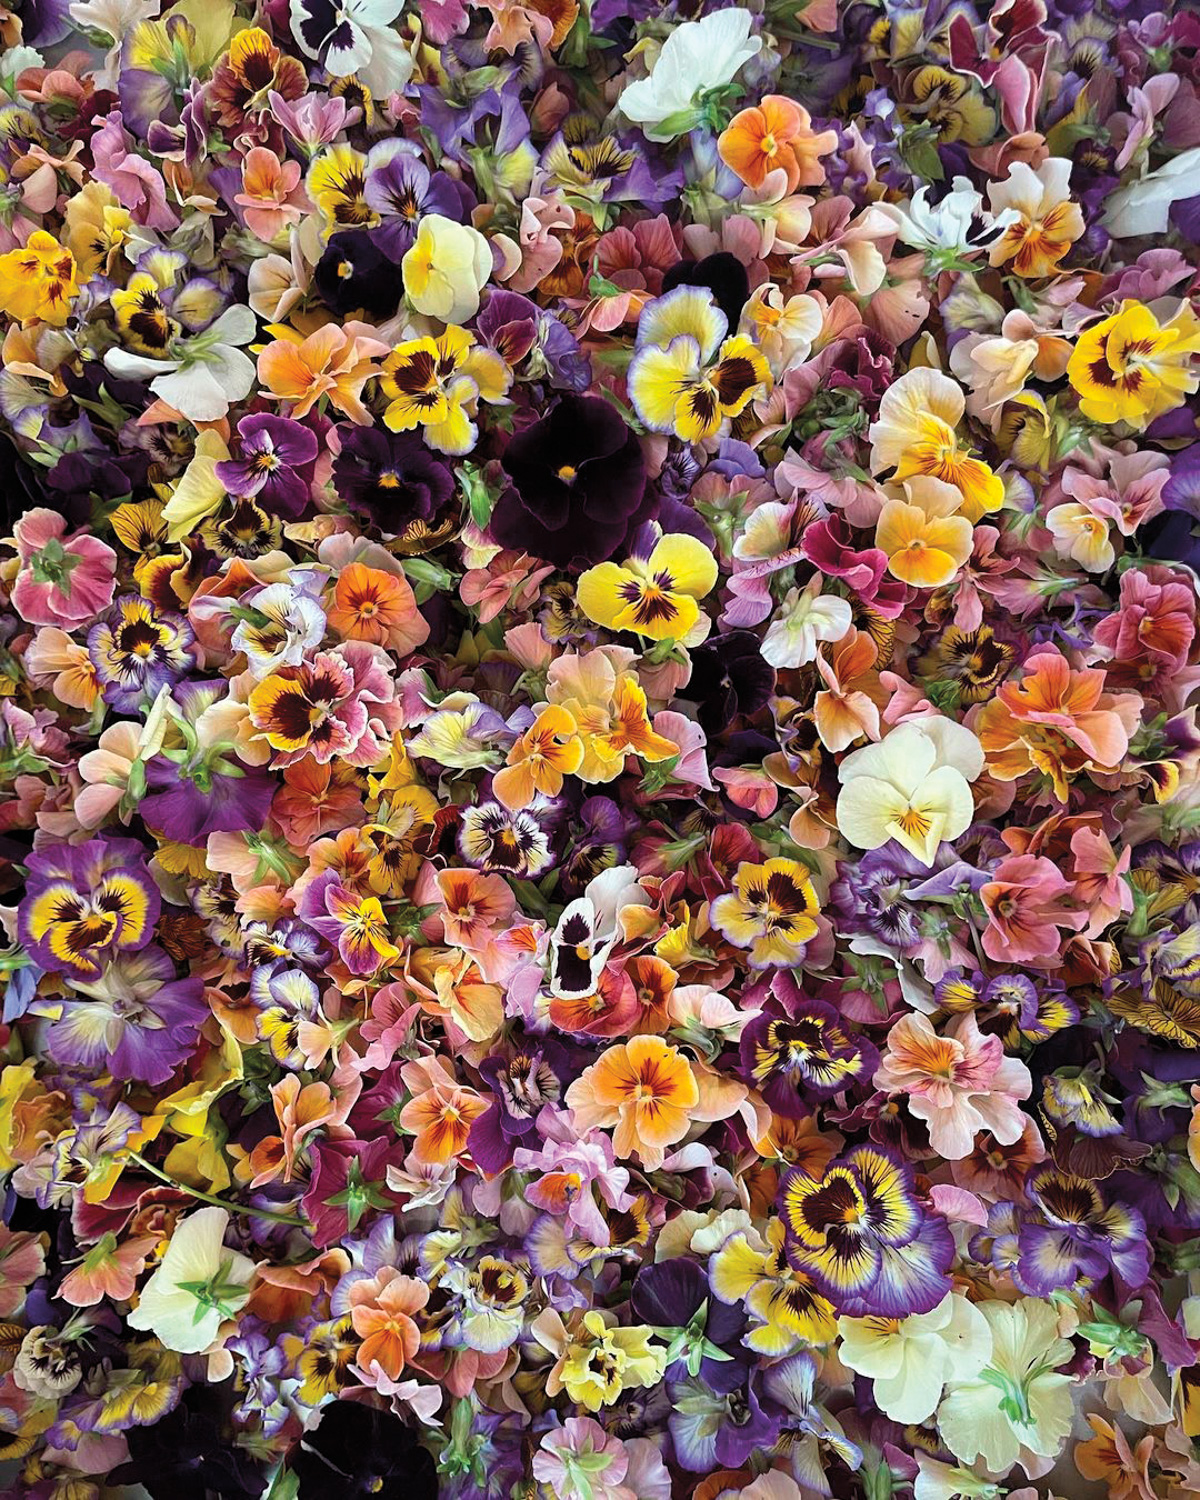 An assortment of pansy flowers in yellow, purple, pink and white at Whipstone Farm